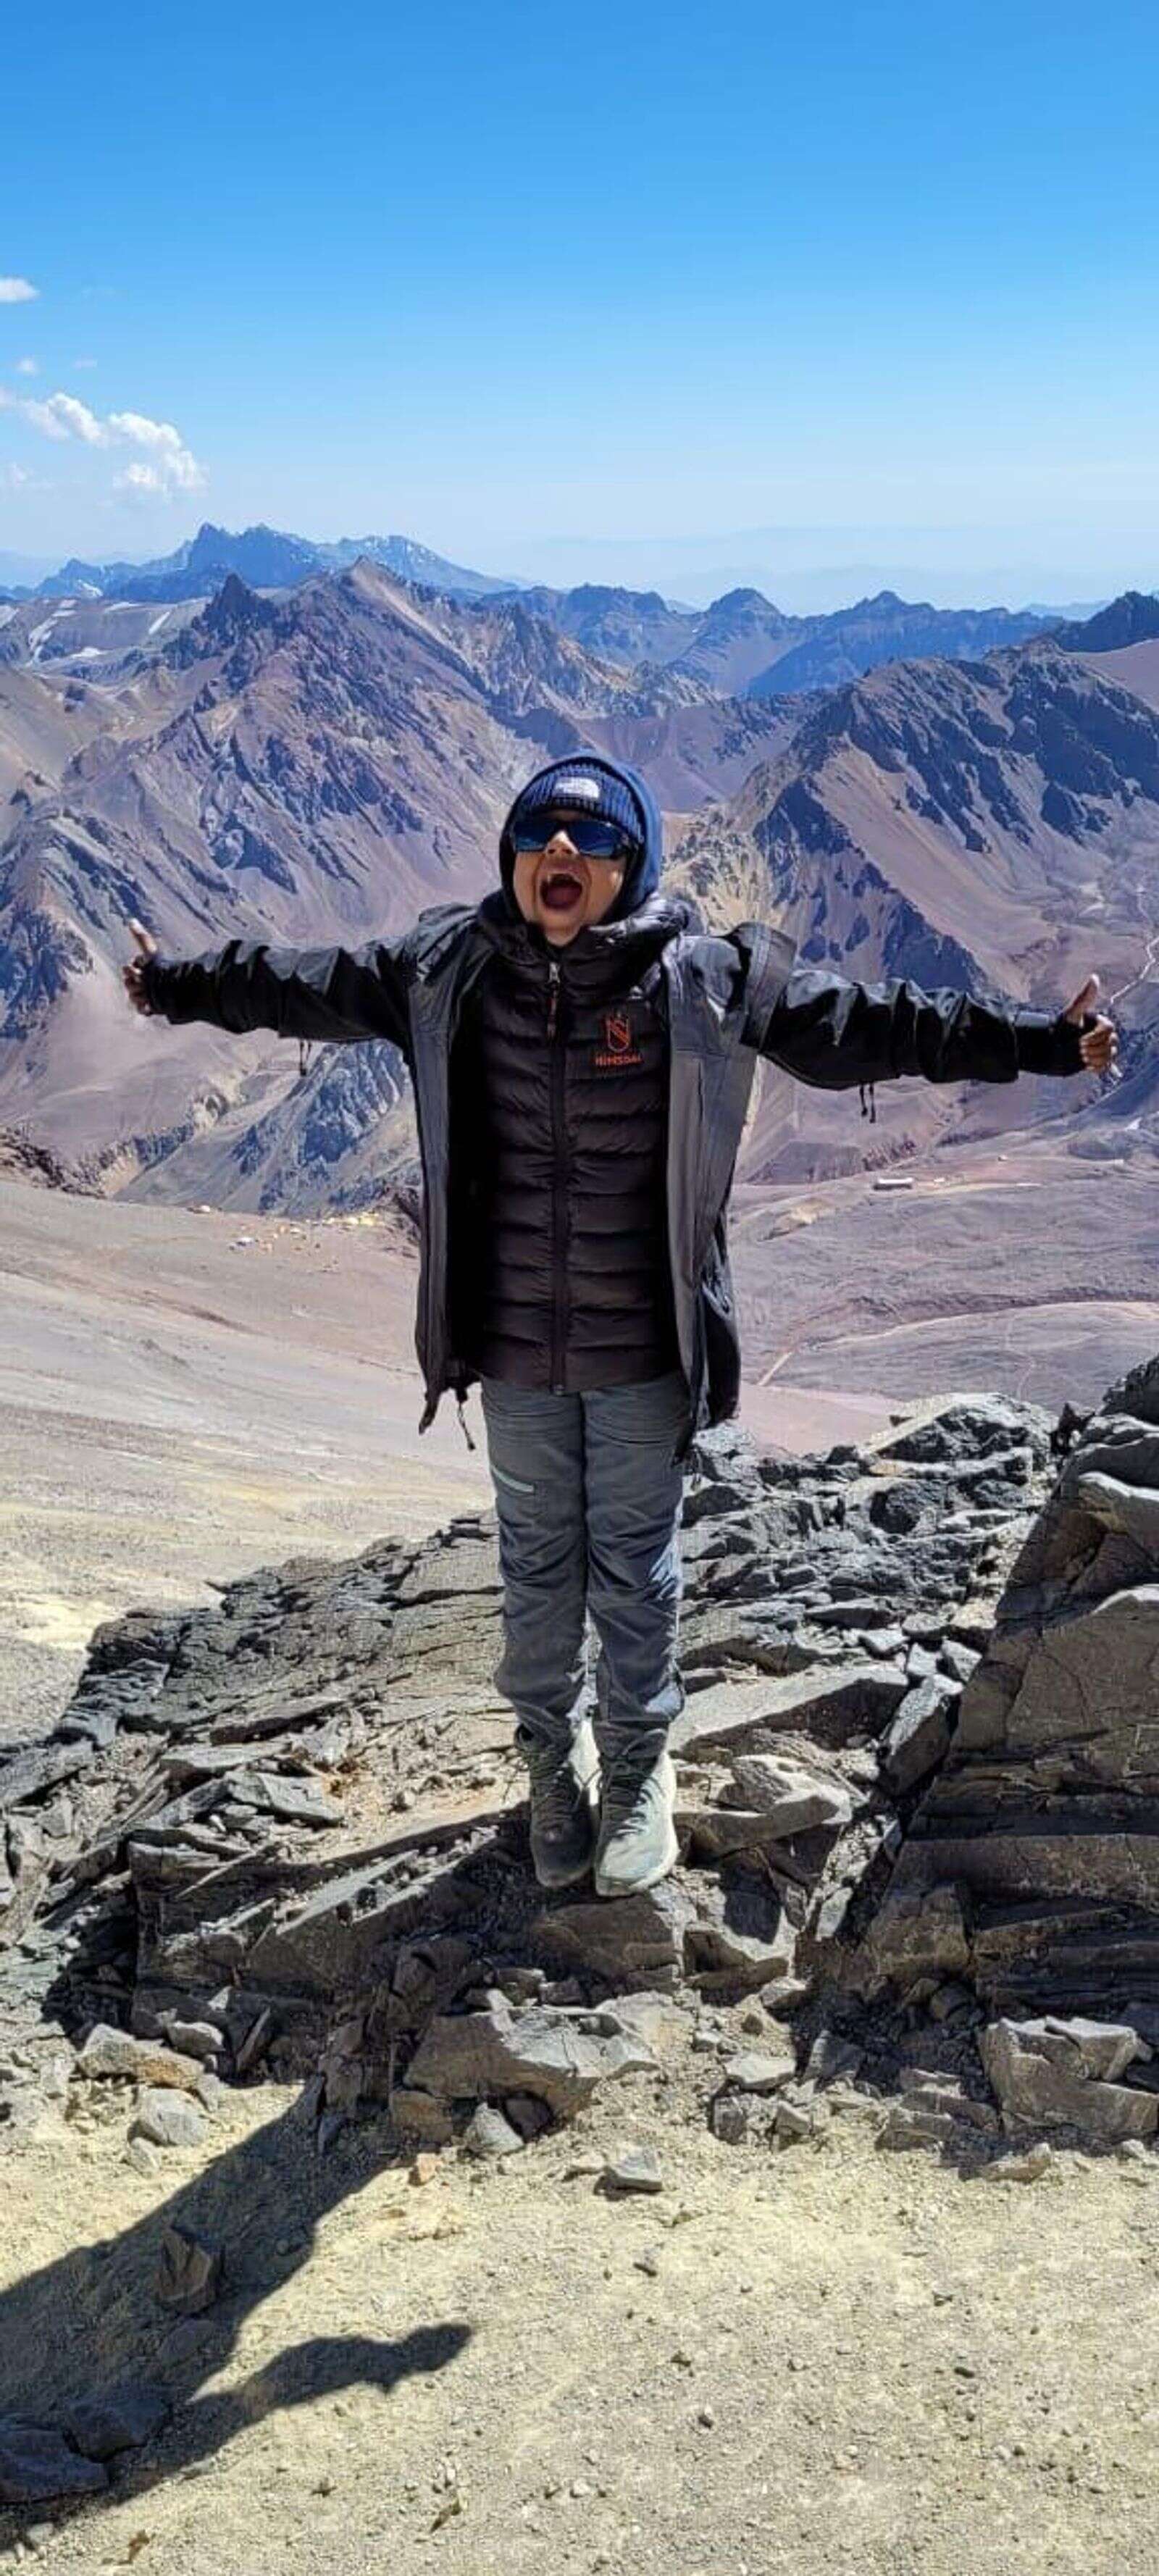 9-year-old dubai-based boy climbs nearly 20,000 feet of tallest mountain in americas